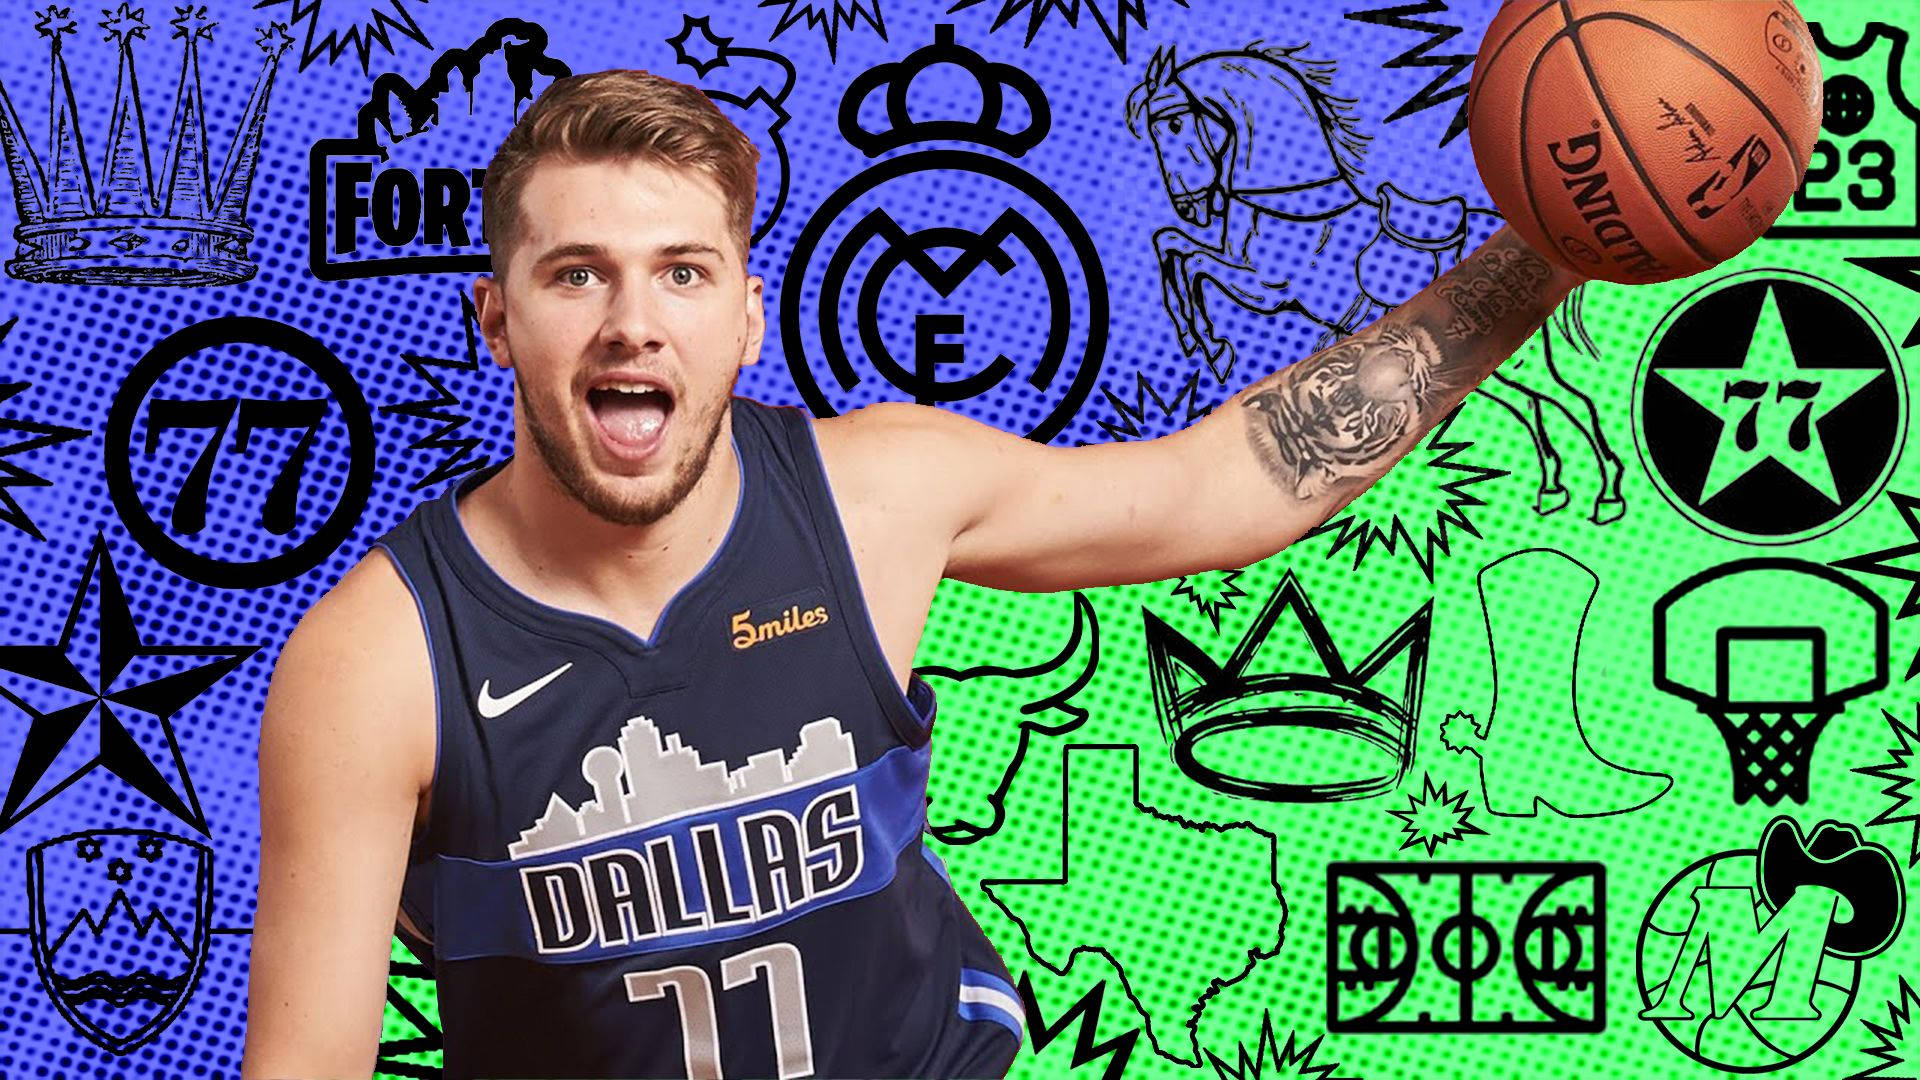 HD luka doncic wallpapers